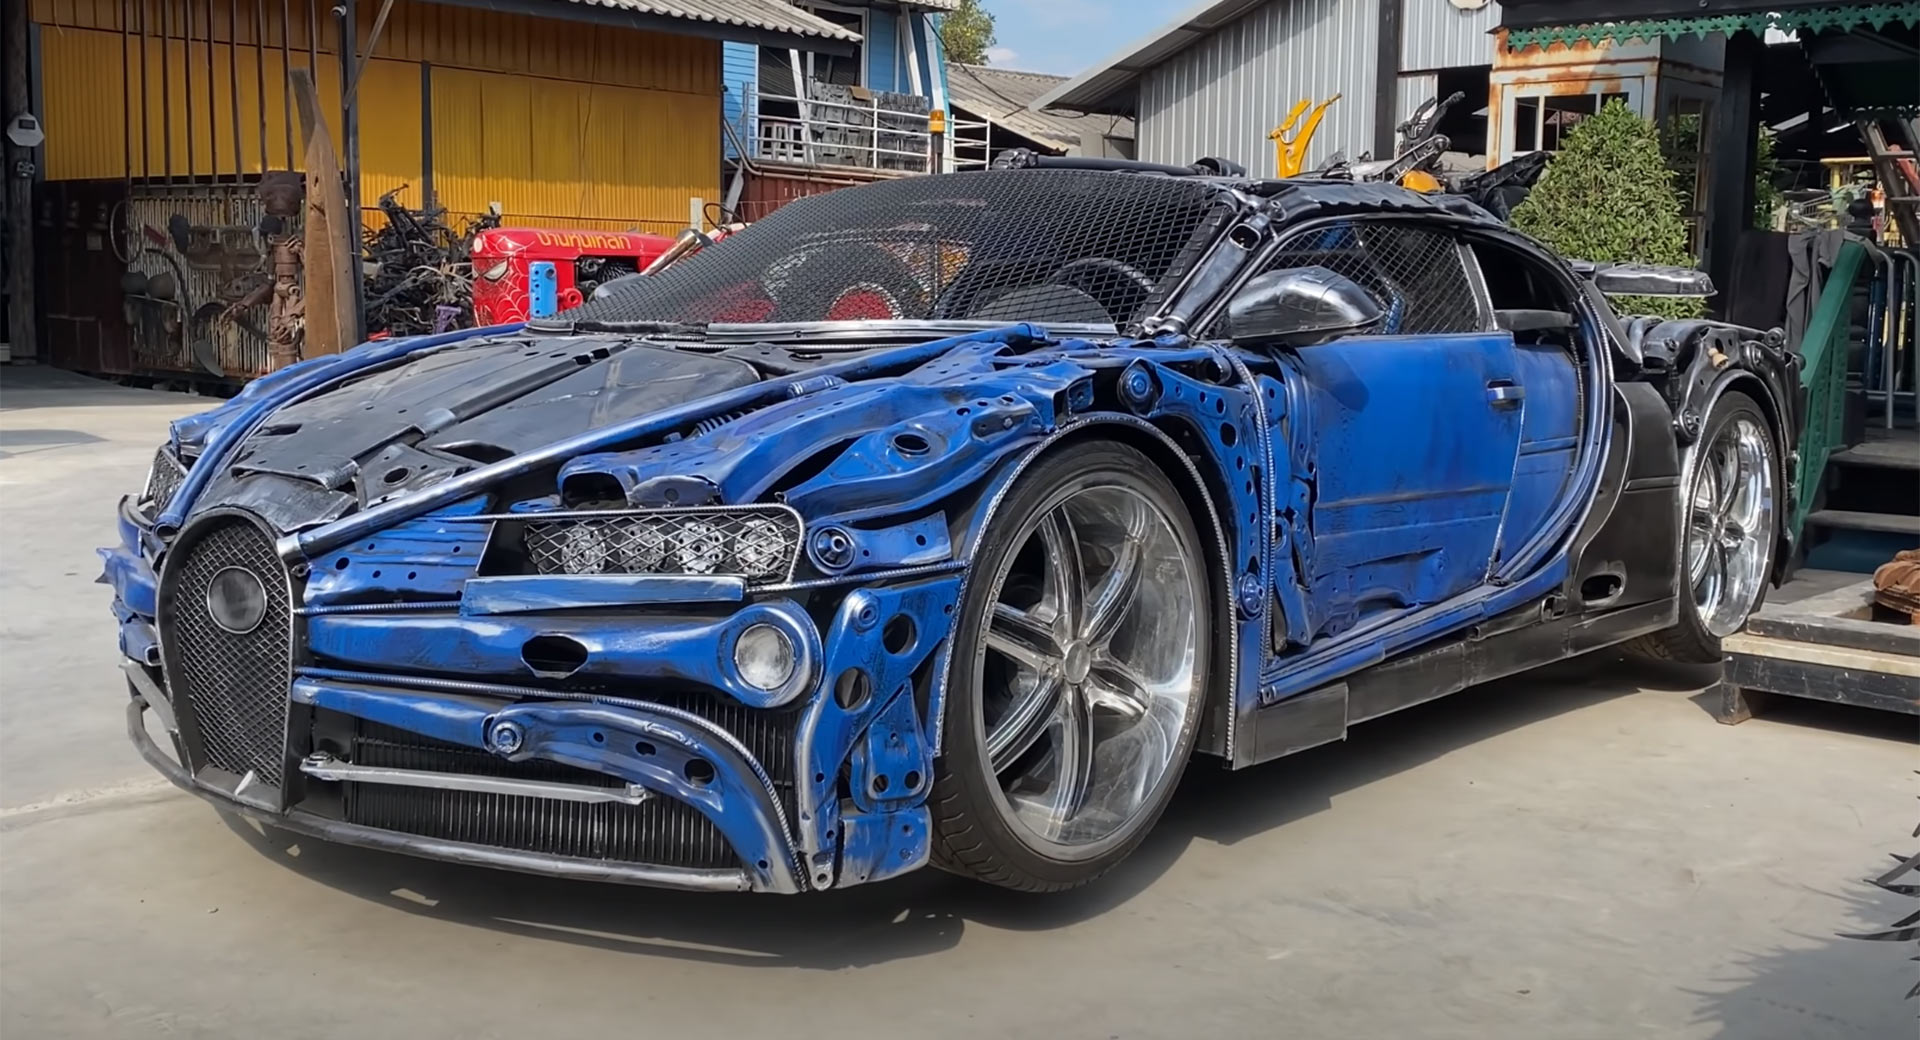 Swede buys Bugatti Chiron replica made from scrap metal in Thailand